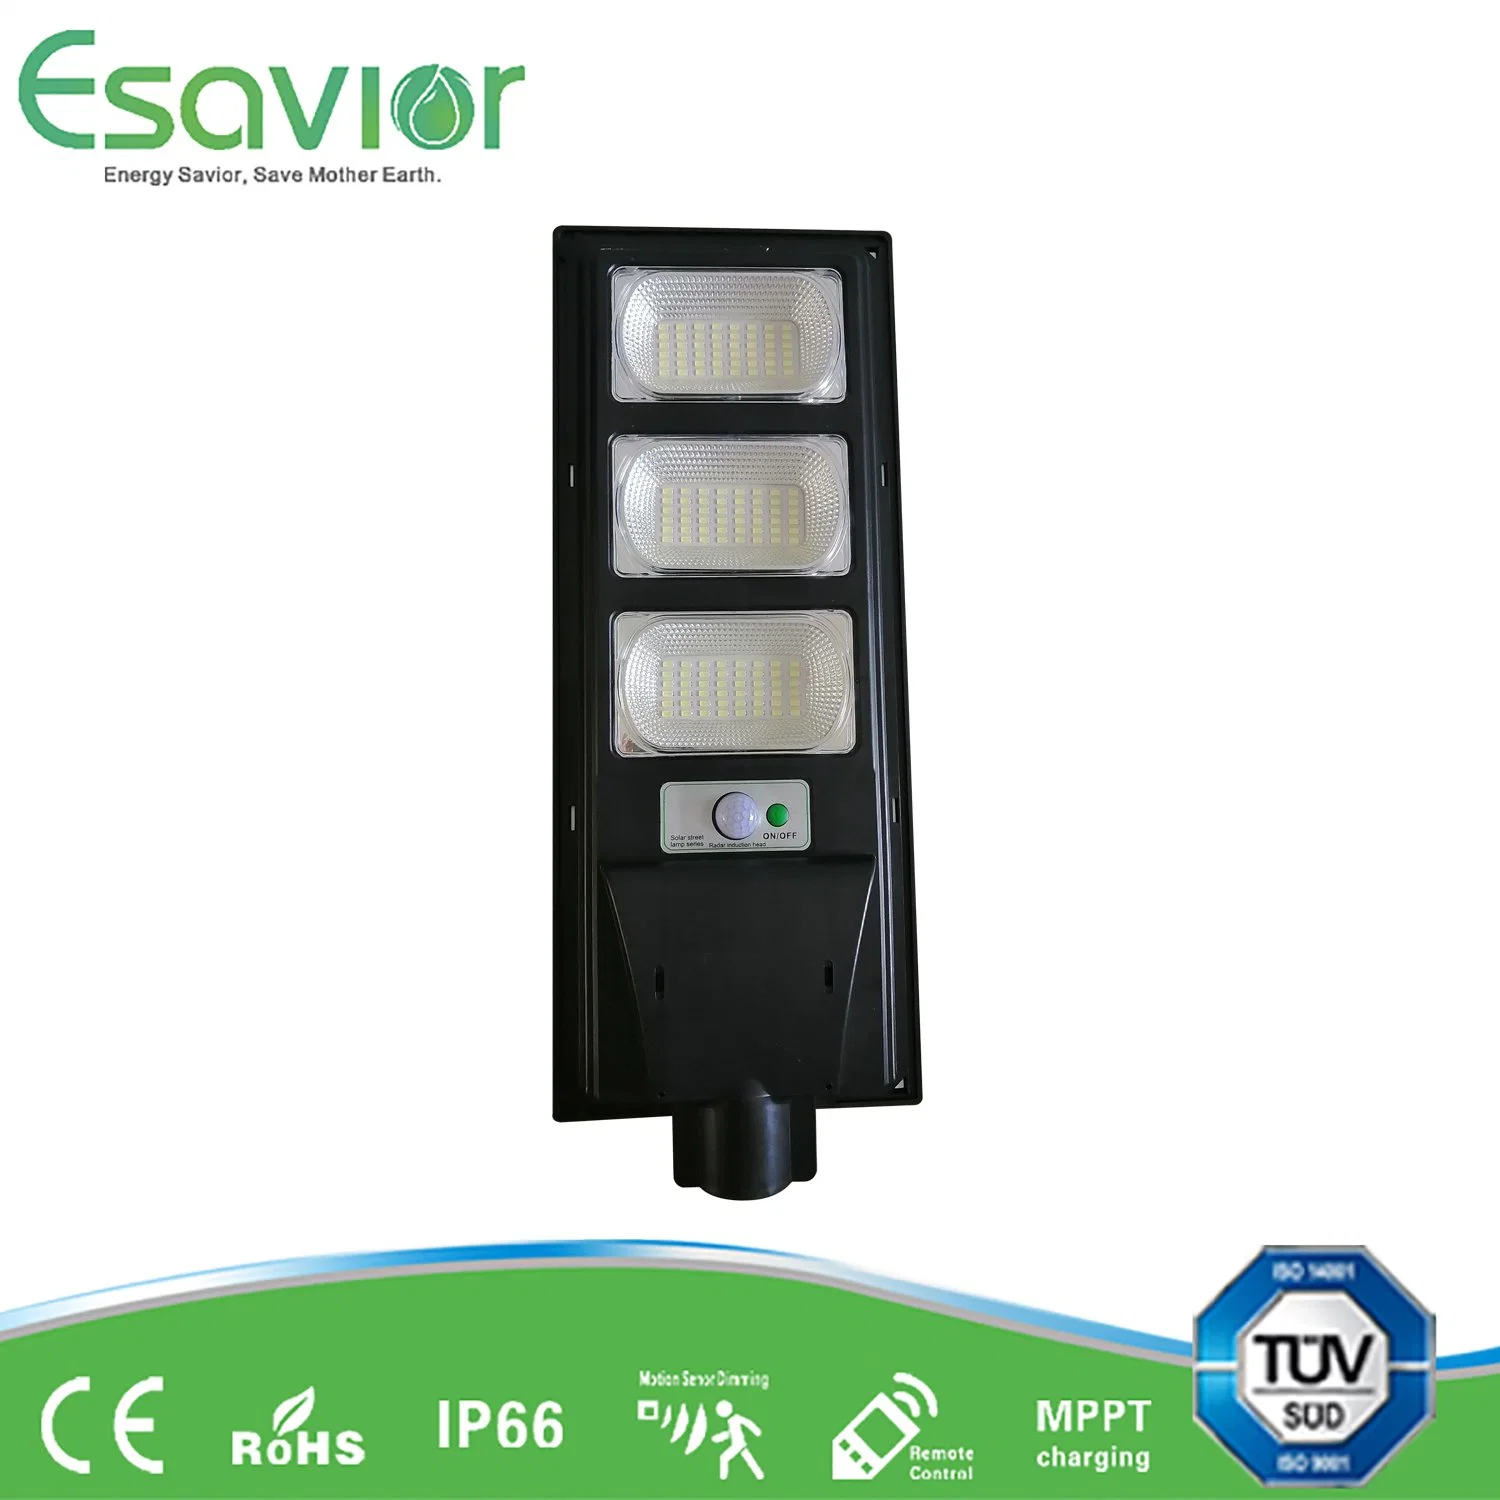 Esavior 90W All in One LED Solar Light 3 Series for Pathway/Roadway/Garden/Wall Lighting